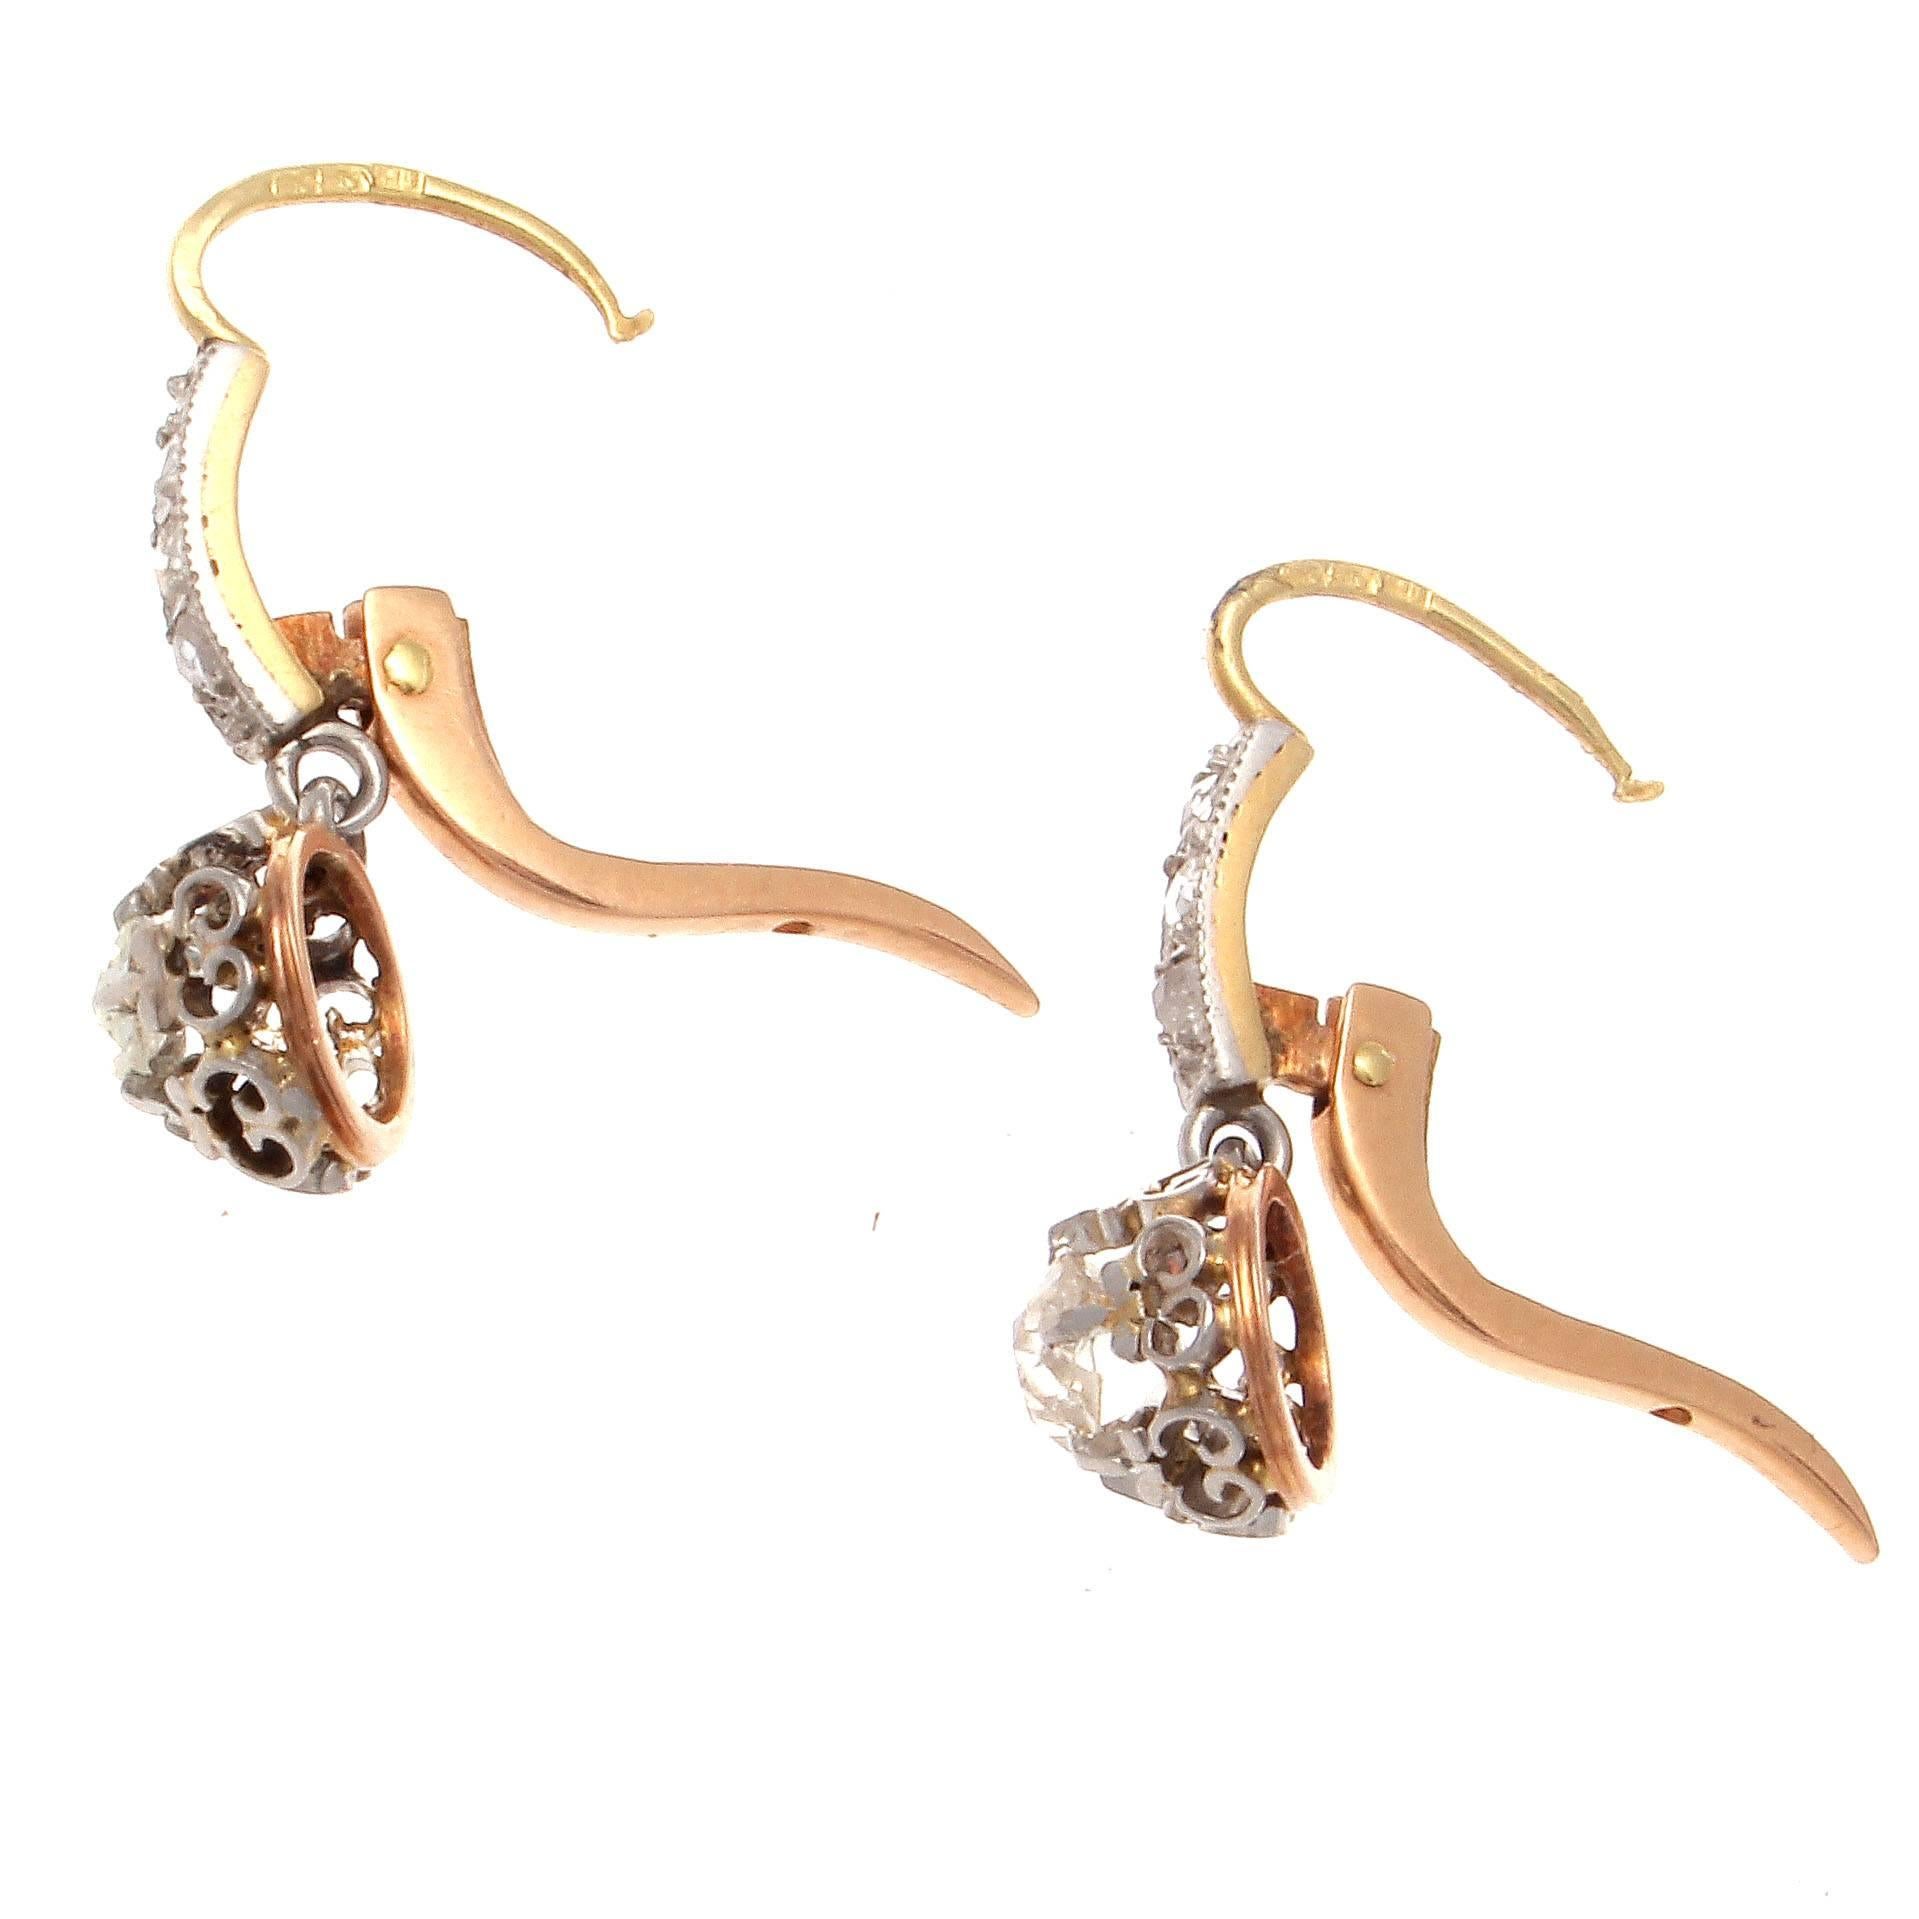 True to its distinctive belle epoque style. These earrings have been designed with gently cascading diamonds leading to the superior hand crafted drops. Featuring elegant platinum and gold design uplifting two old cushion cut diamonds weighing